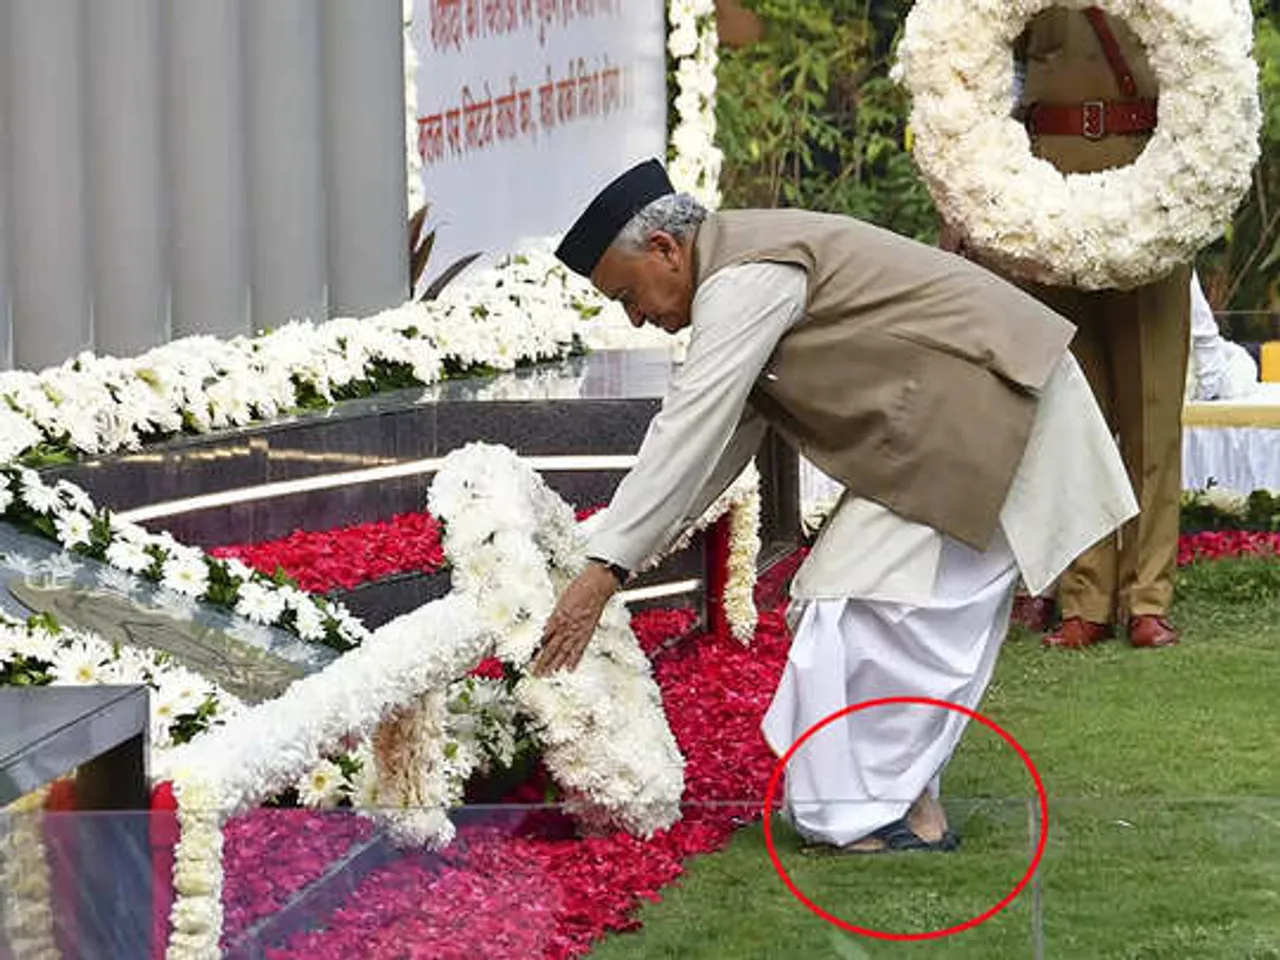 Cong slams Maharashtra Governor for not removing footwear while paying tributes to 26/11 martyrs